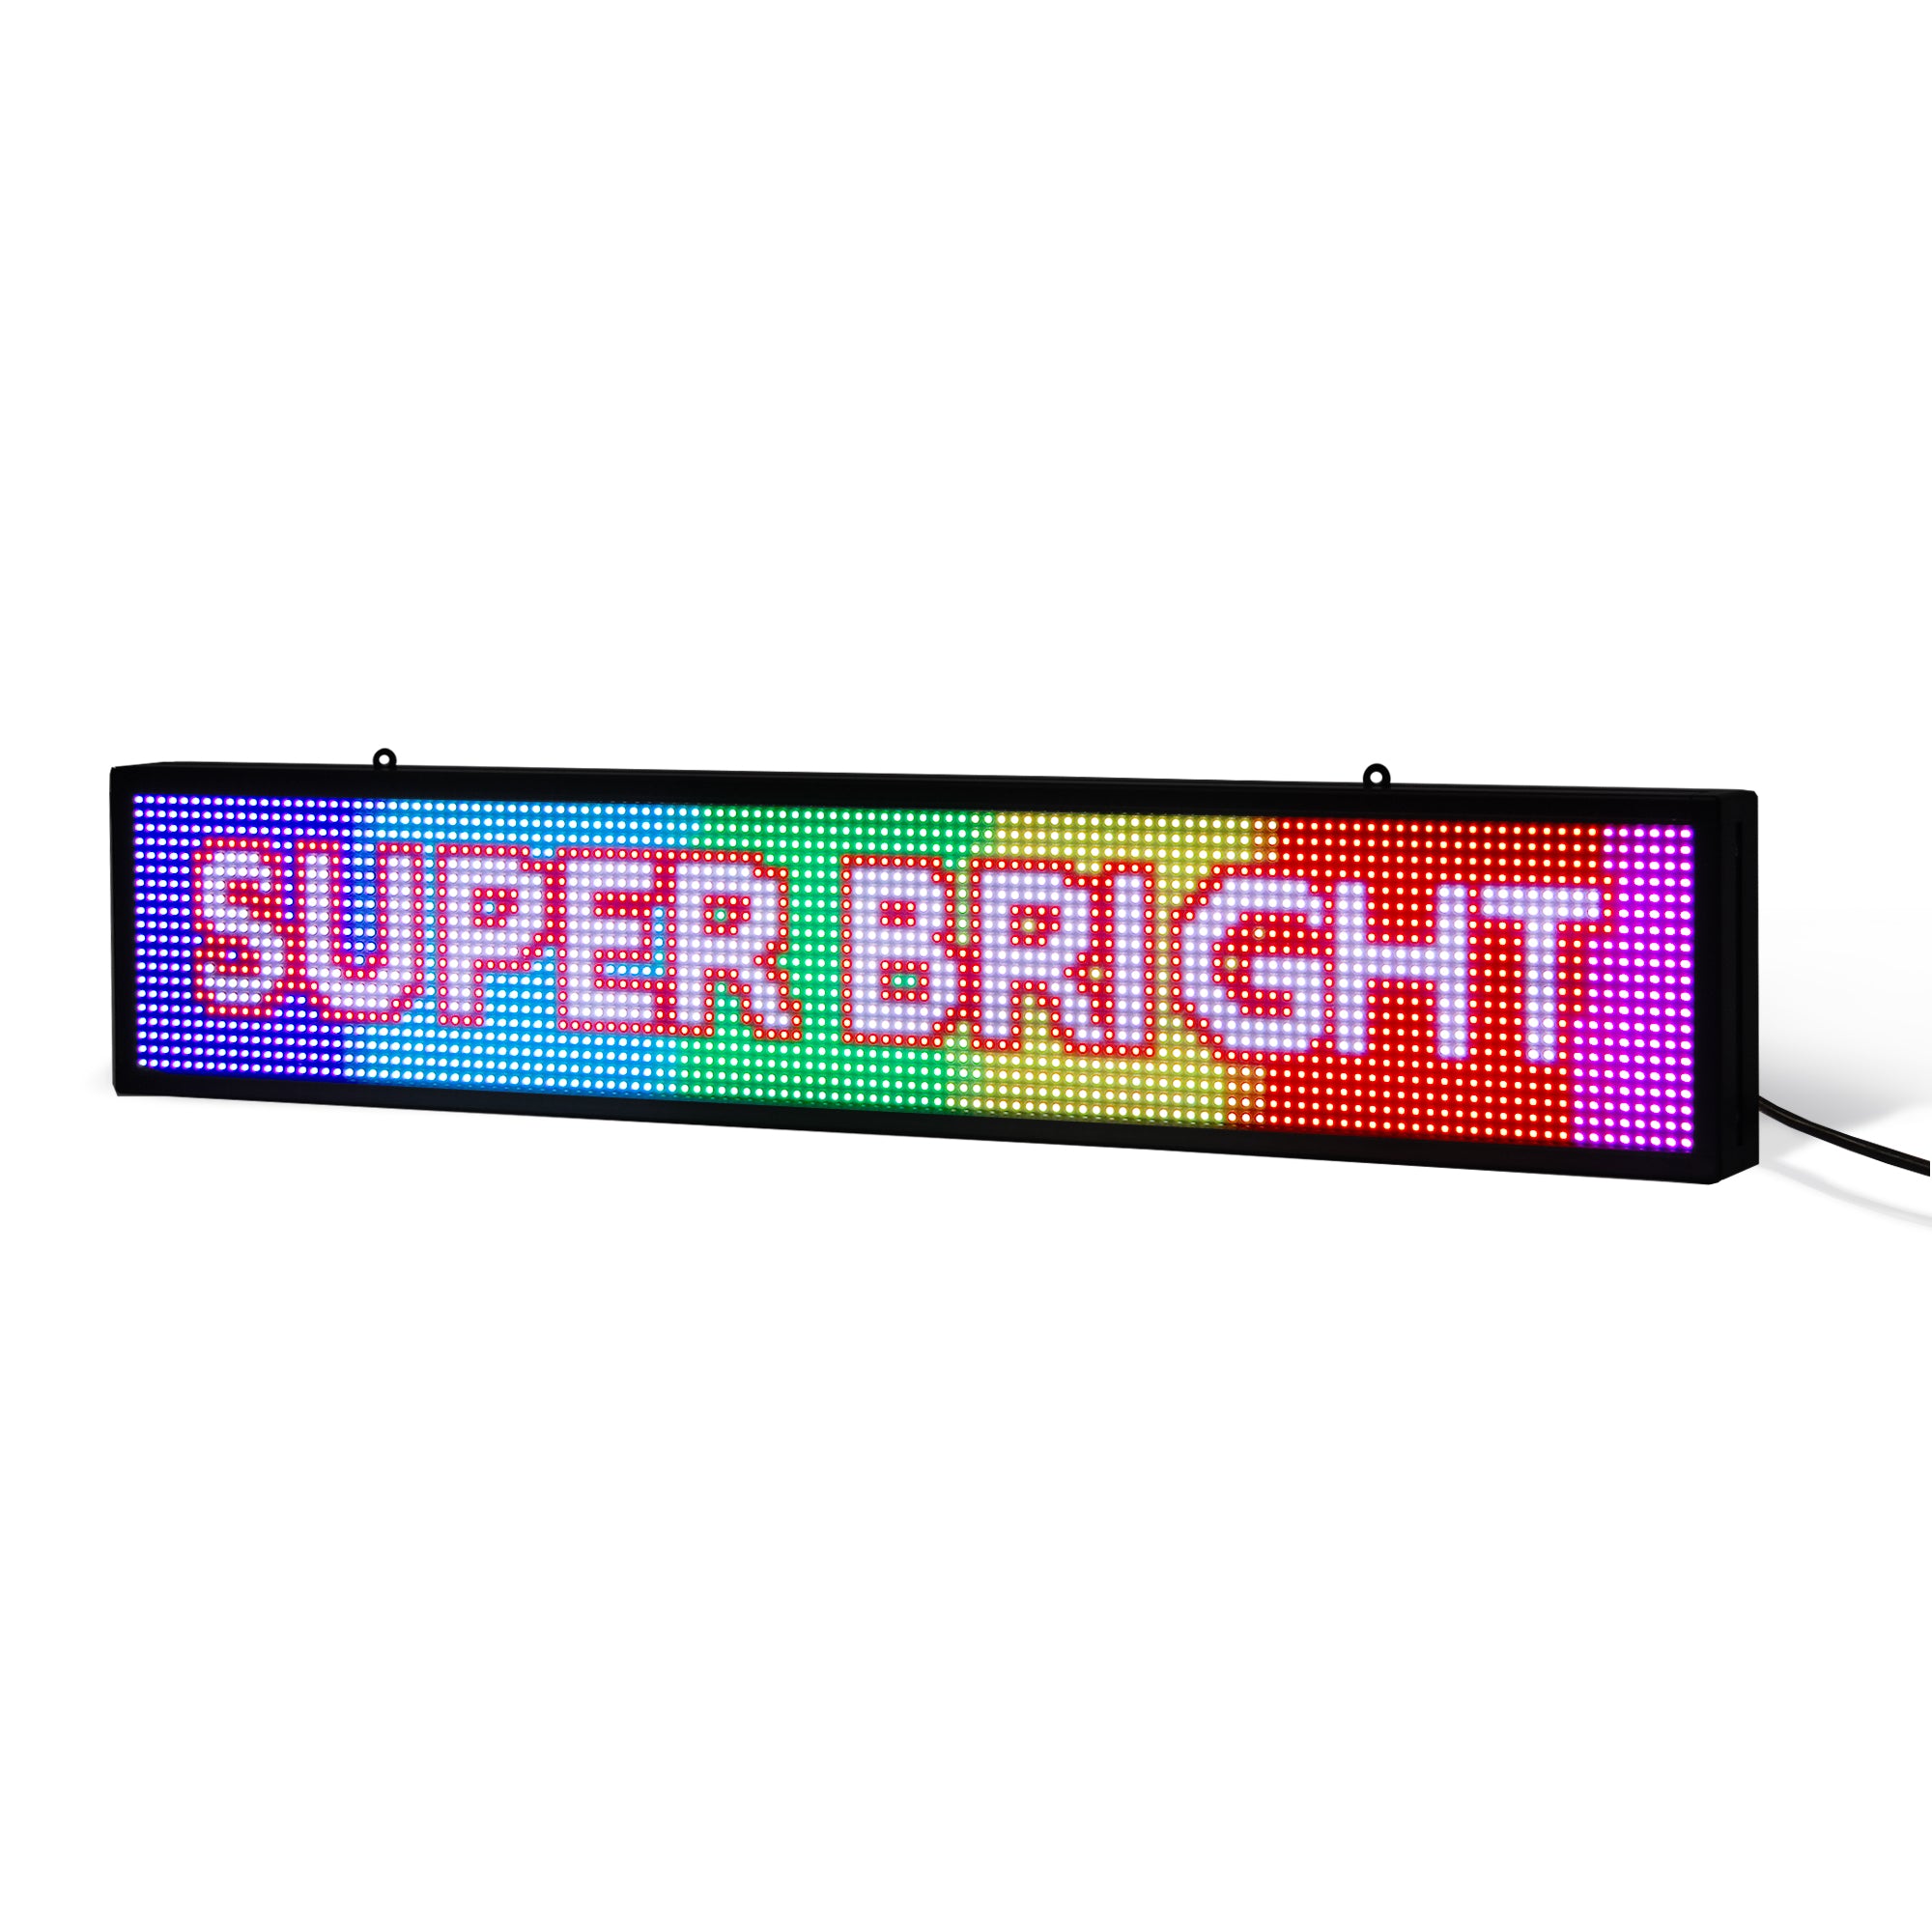 8 x 77 inch Ultra-bright Full Video Color Programmable LED Sign for Store Windows